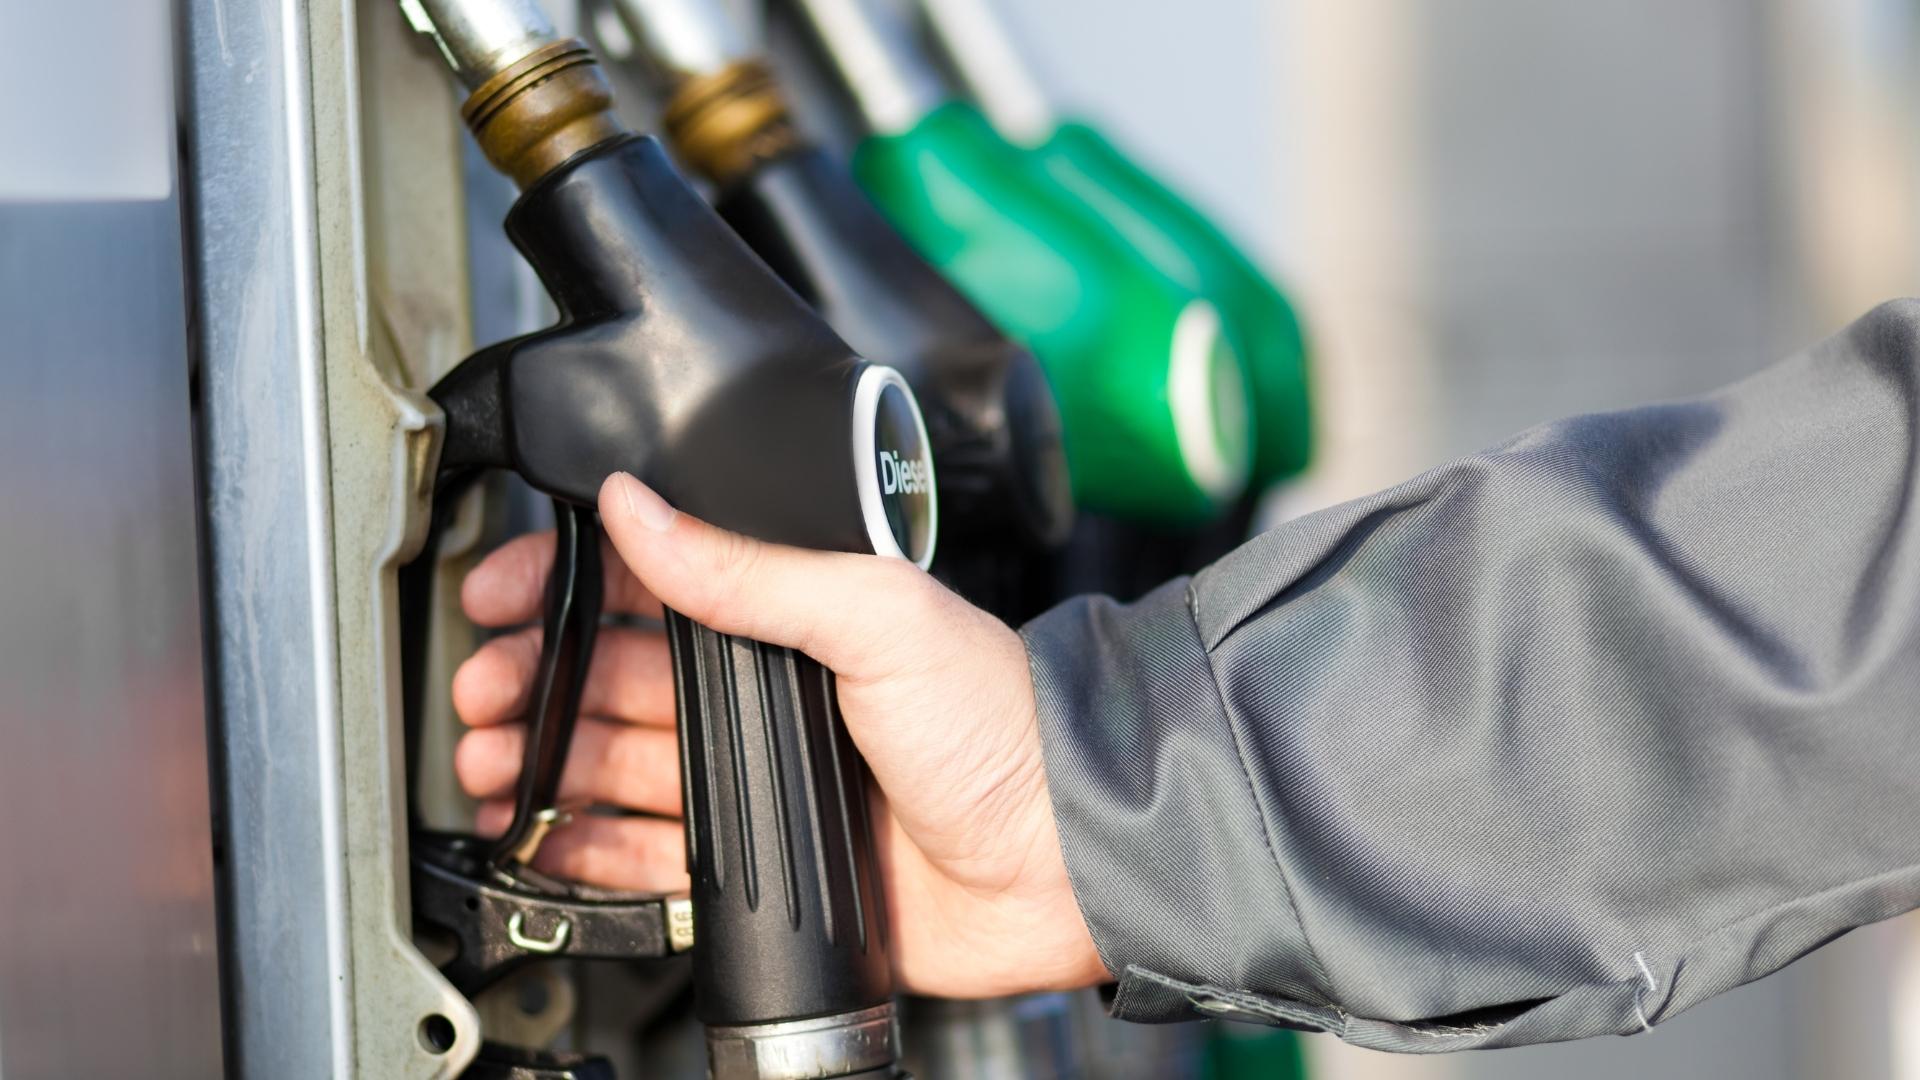 Photo of a hand taking hold of the diesel pump at a fueling station